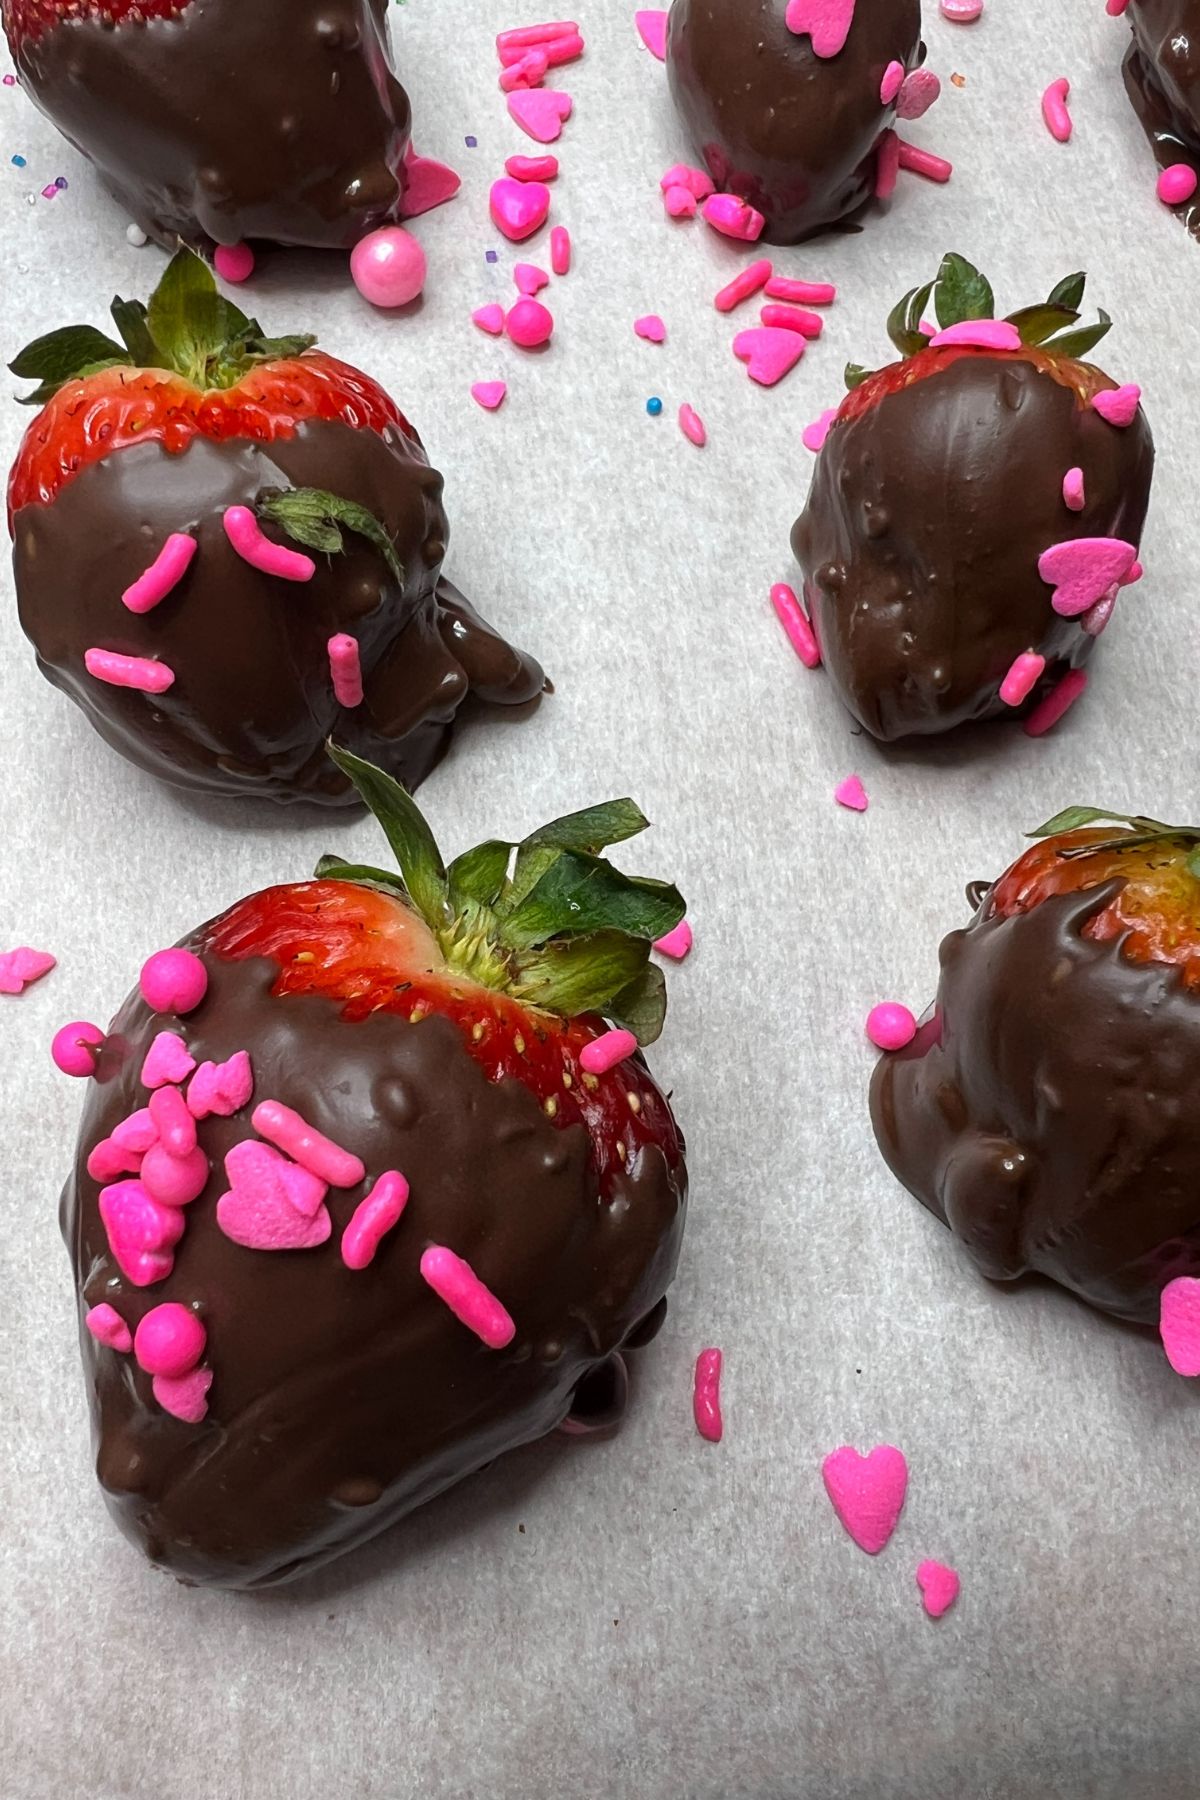 Nutella and chocolate covered strawberries with sprinkles on parchment paper.